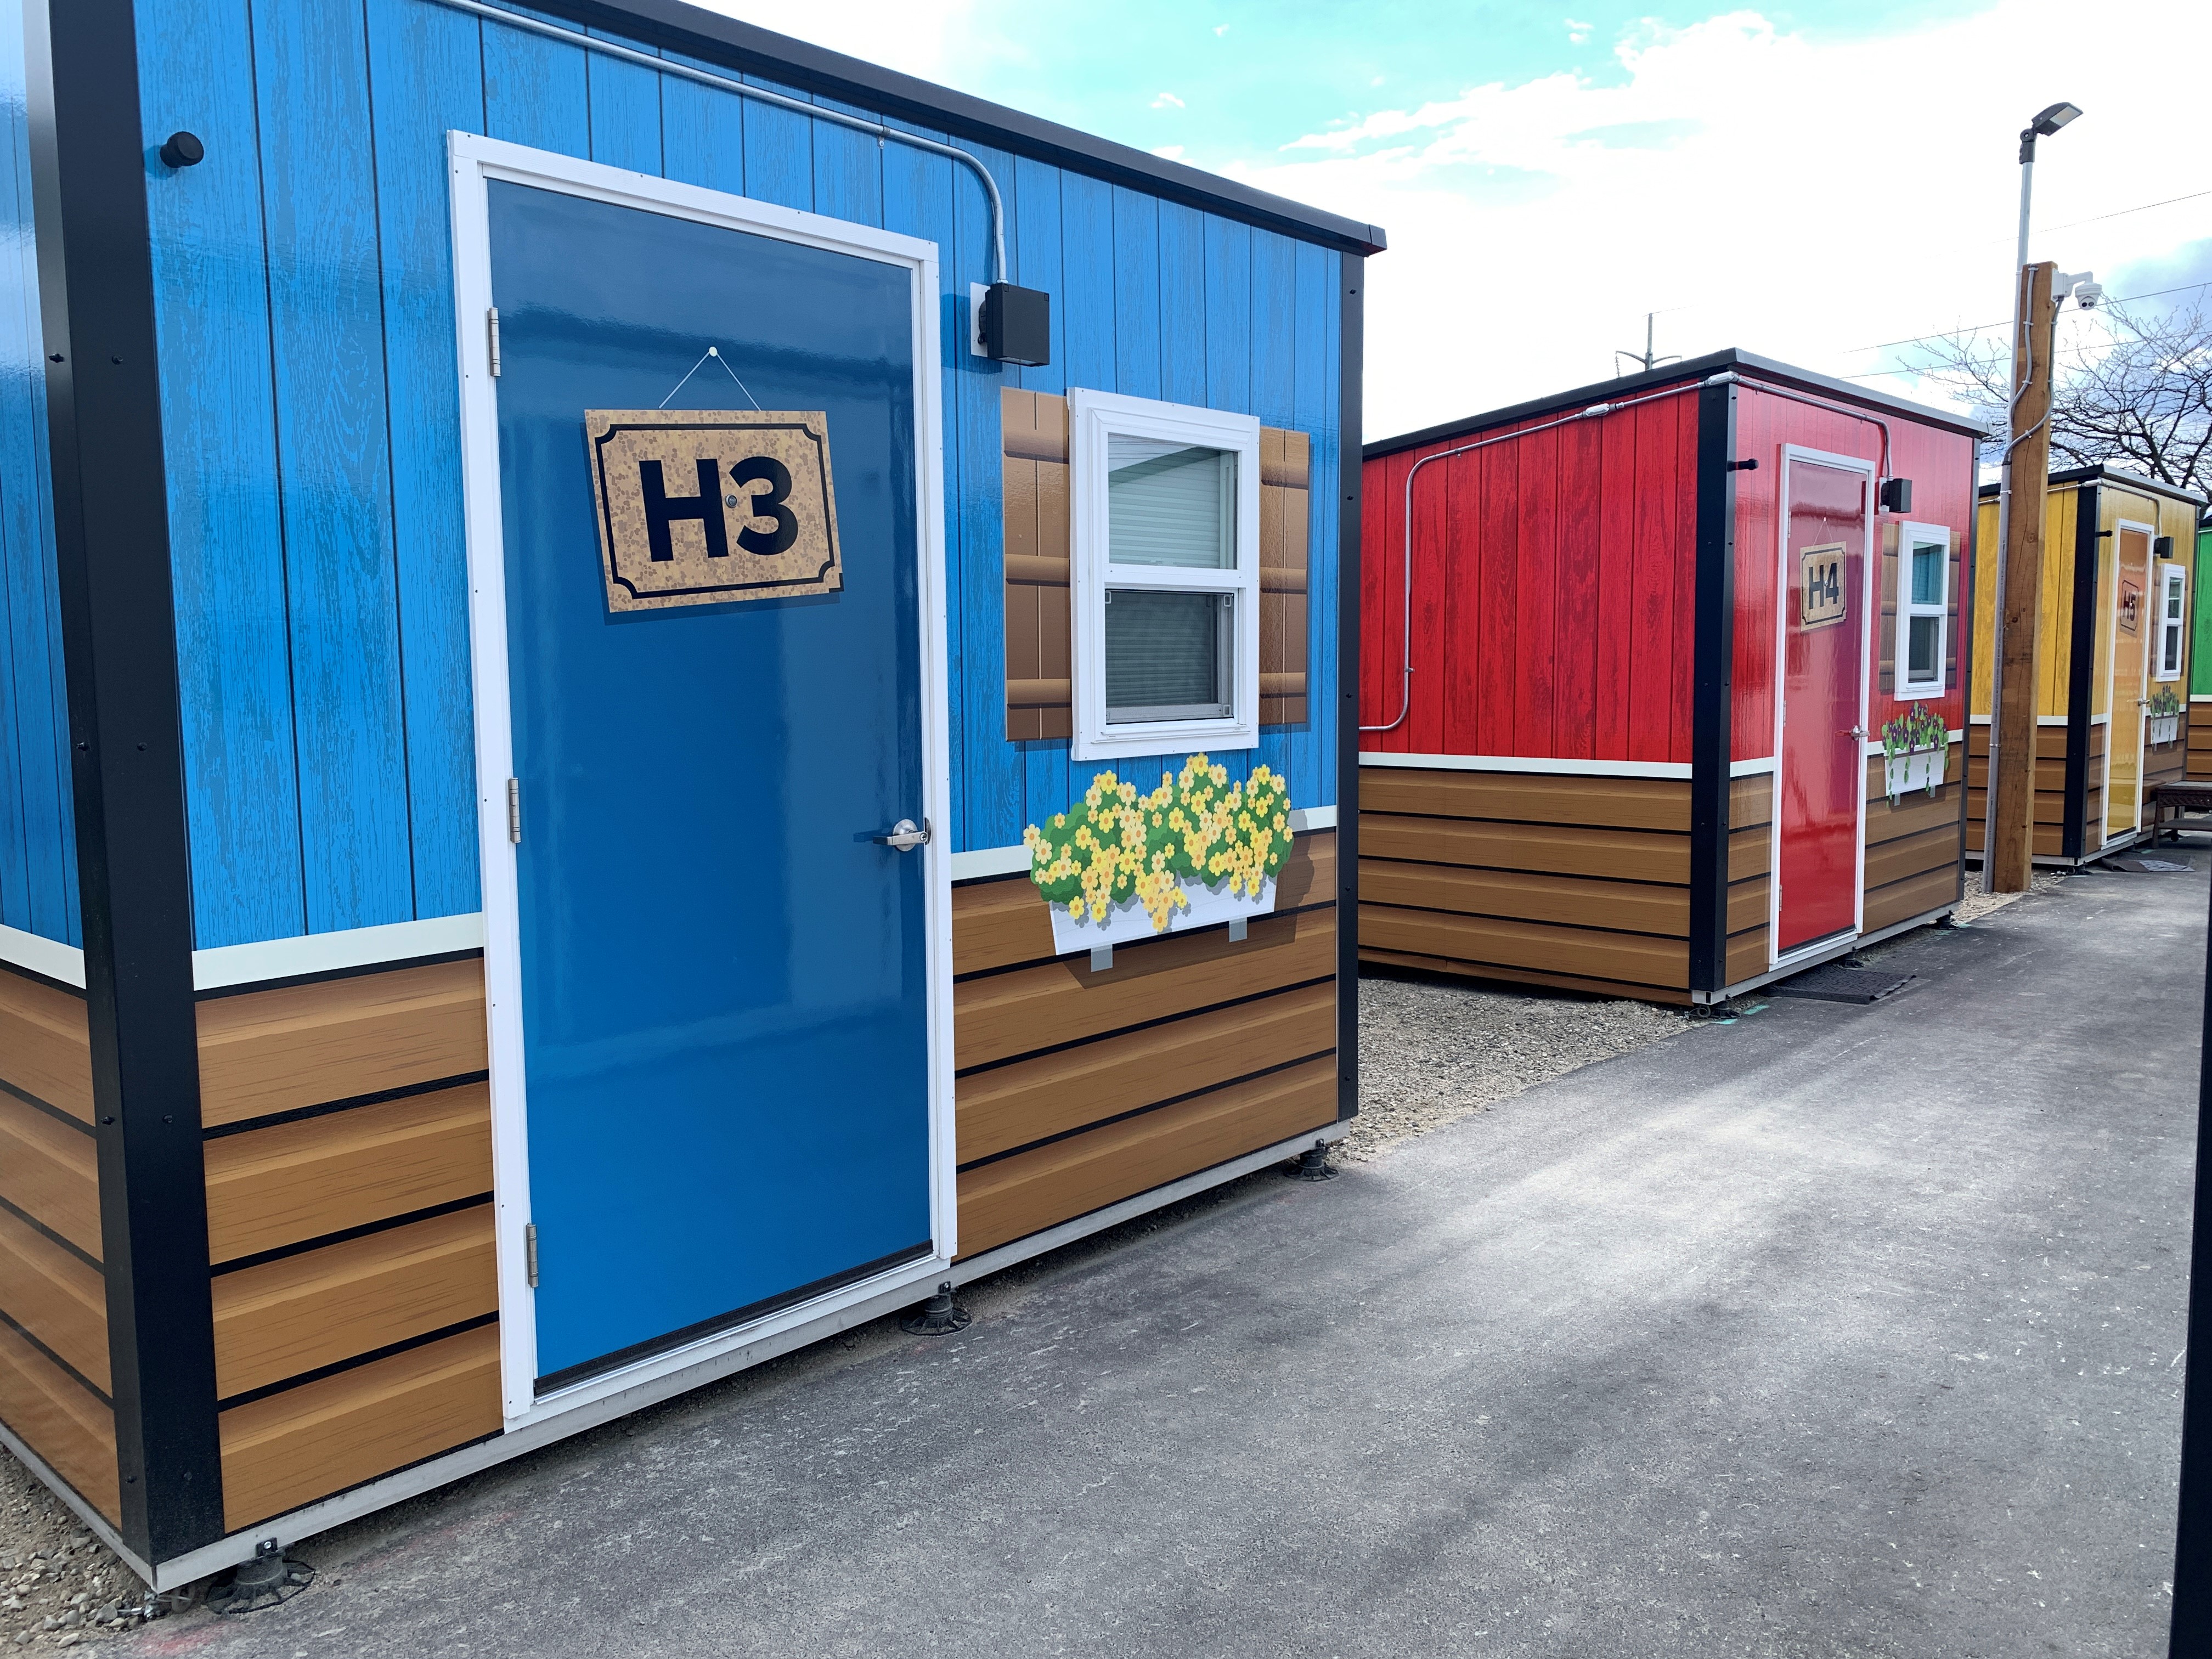 Tiny home community in Kelowna fully operational with programs up and
running